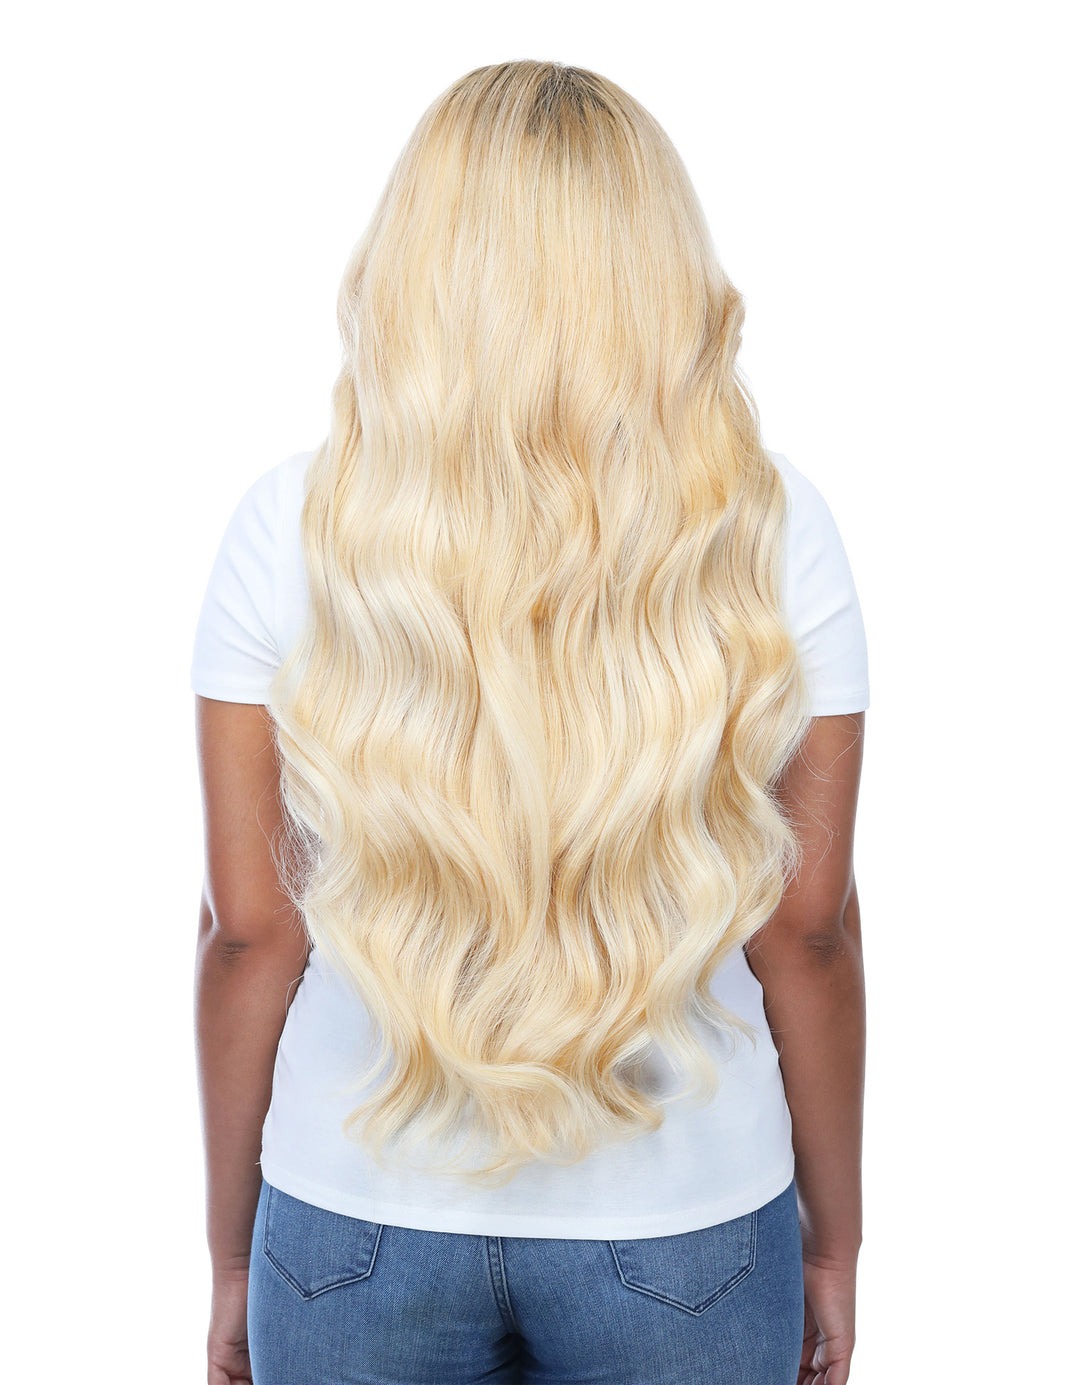 REMY VIRGIN FILIPINO I TIP EXTENSIONS MICRO RING 27 STRAWBERRY BLONDE